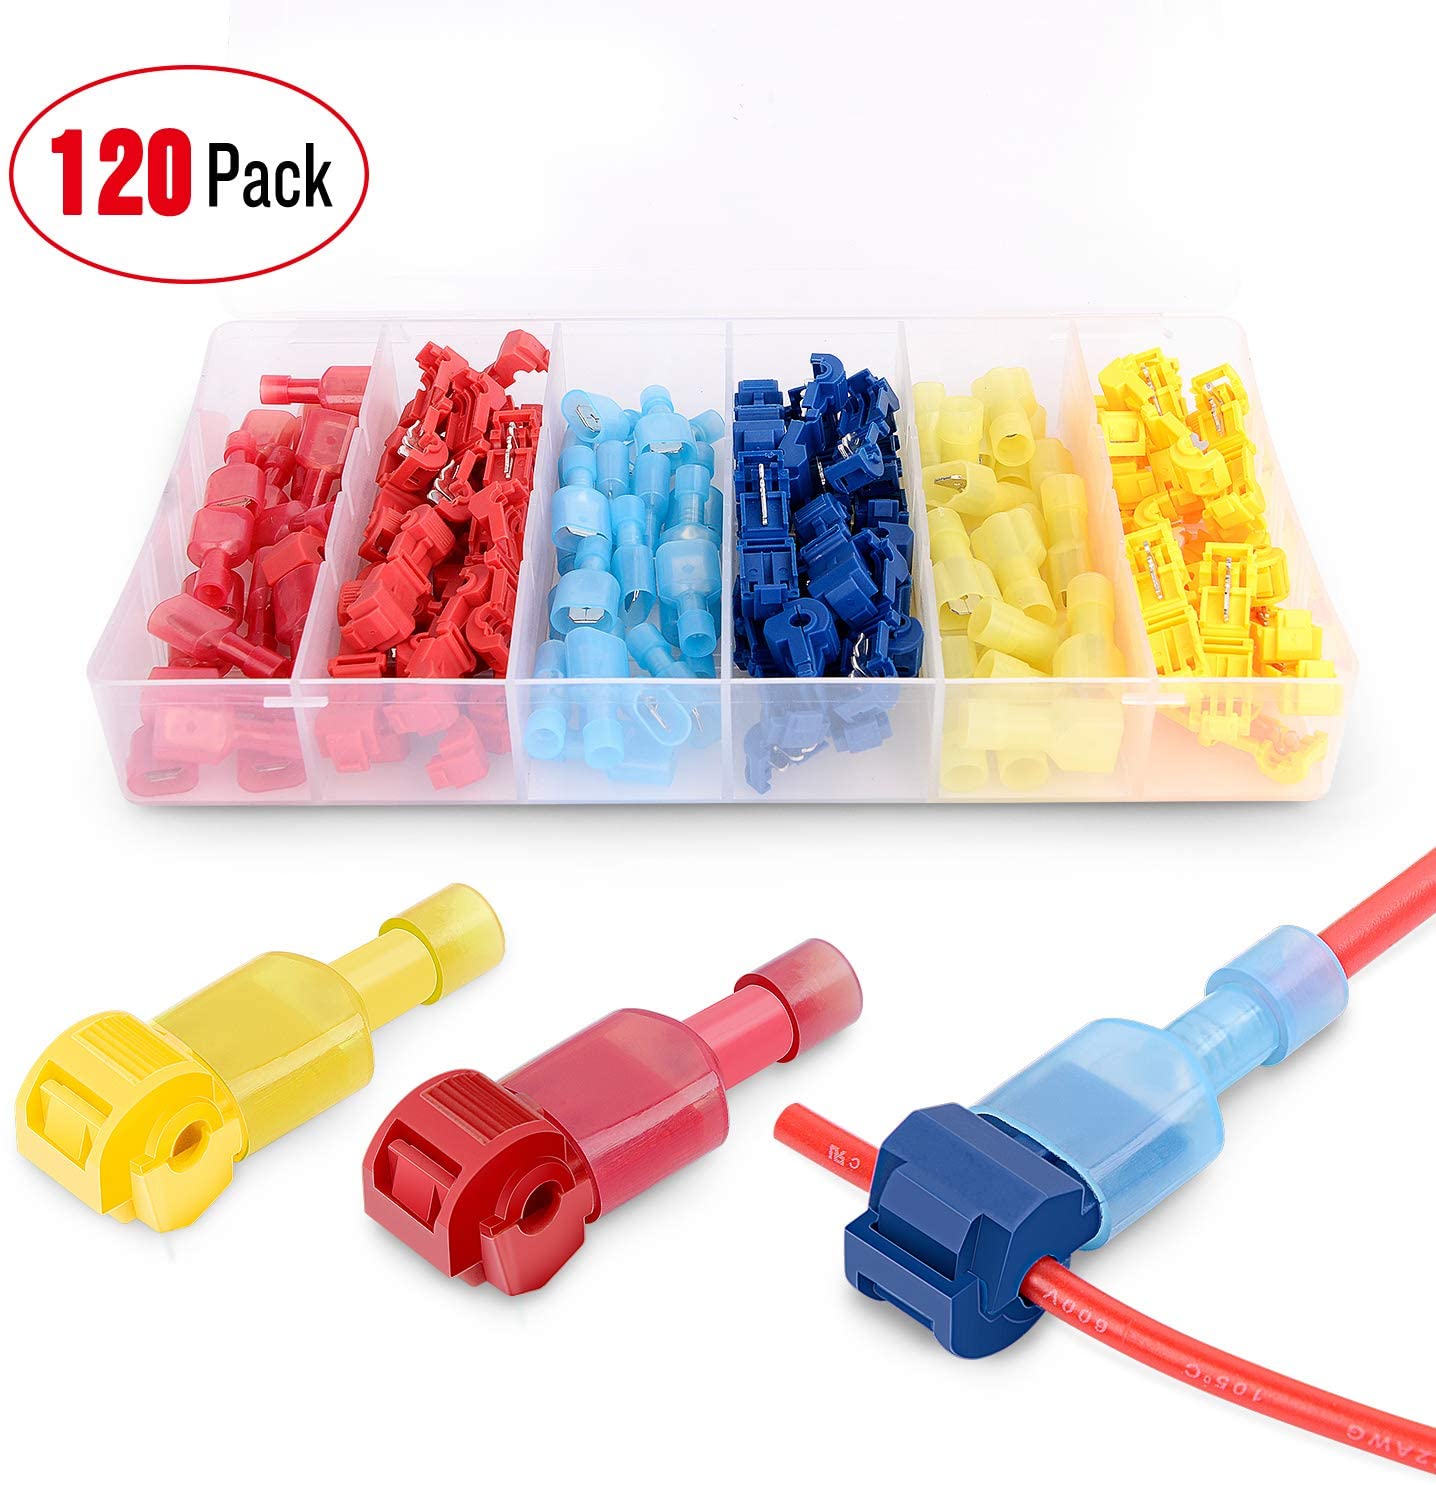 Nilight 120 Pcs/60 Pairs Quick Splice Wire Terminals T-Tap Self-stripping with Nylon Fully Insulated Male Quick Disconnects Kit, 2 Years Warranty